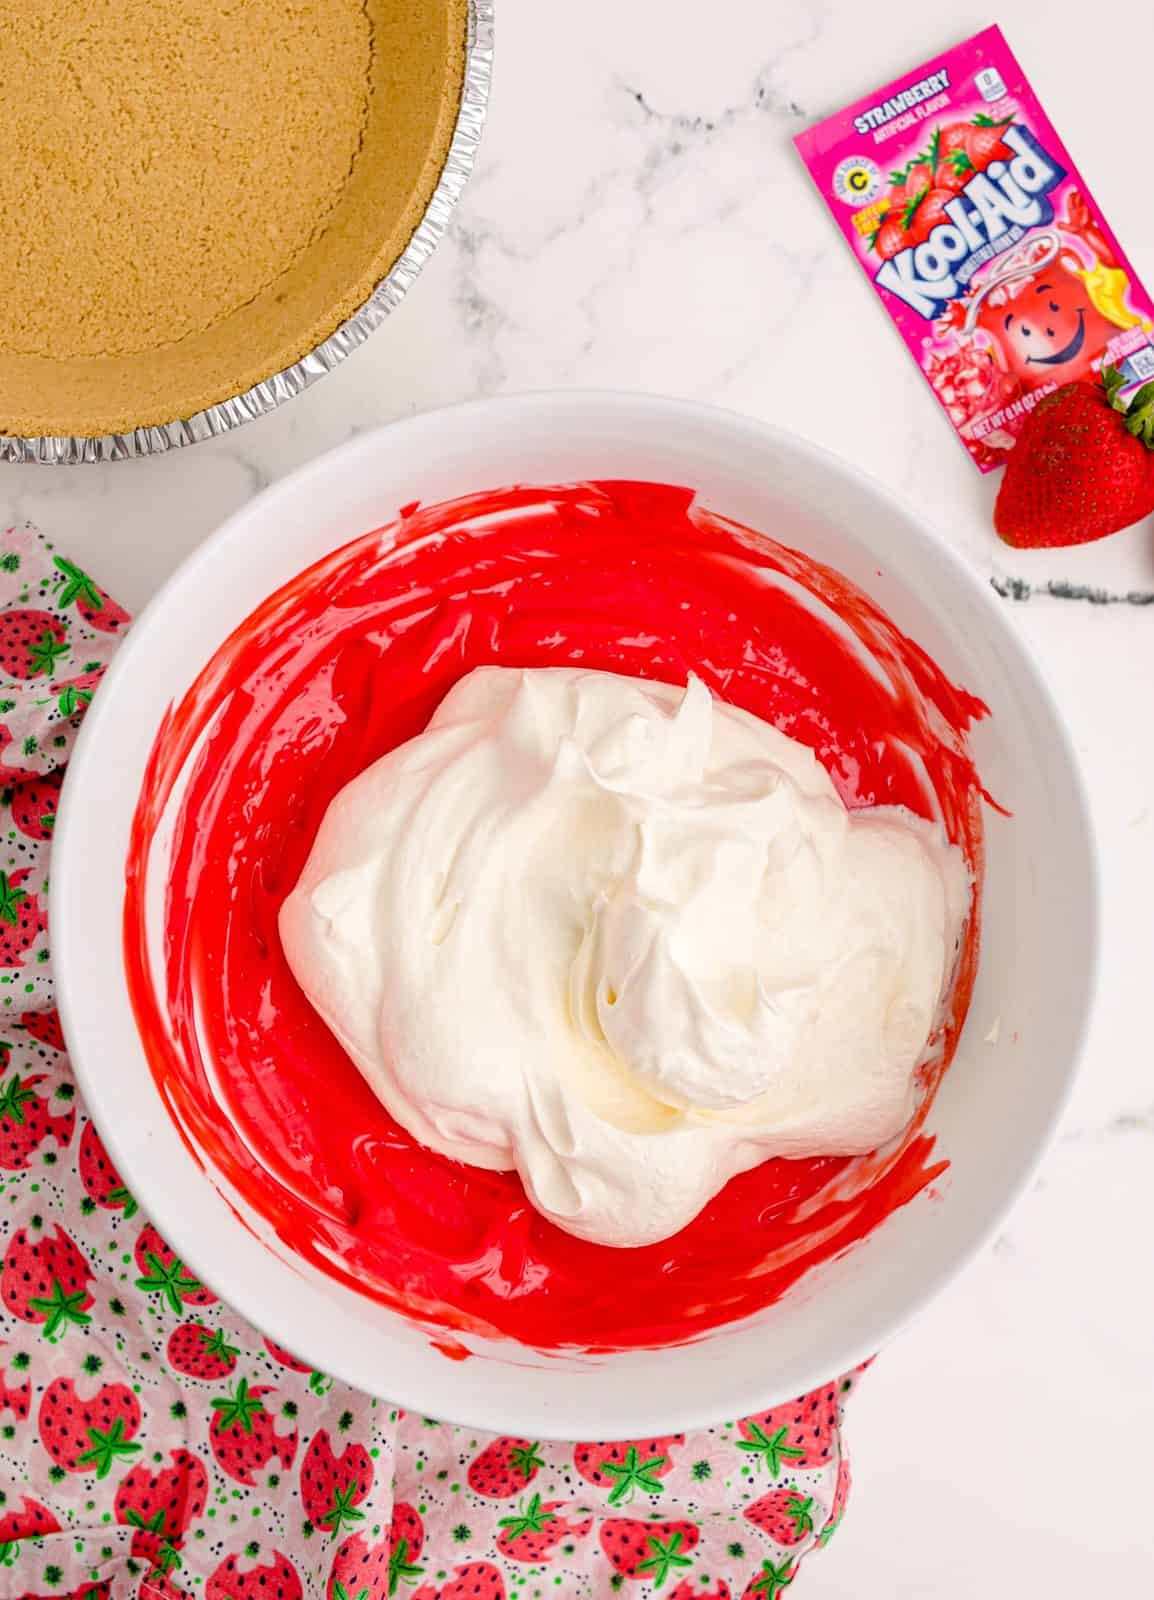 Mixed up Kool-Aid mixture with cool whip added on top in a white bowl.